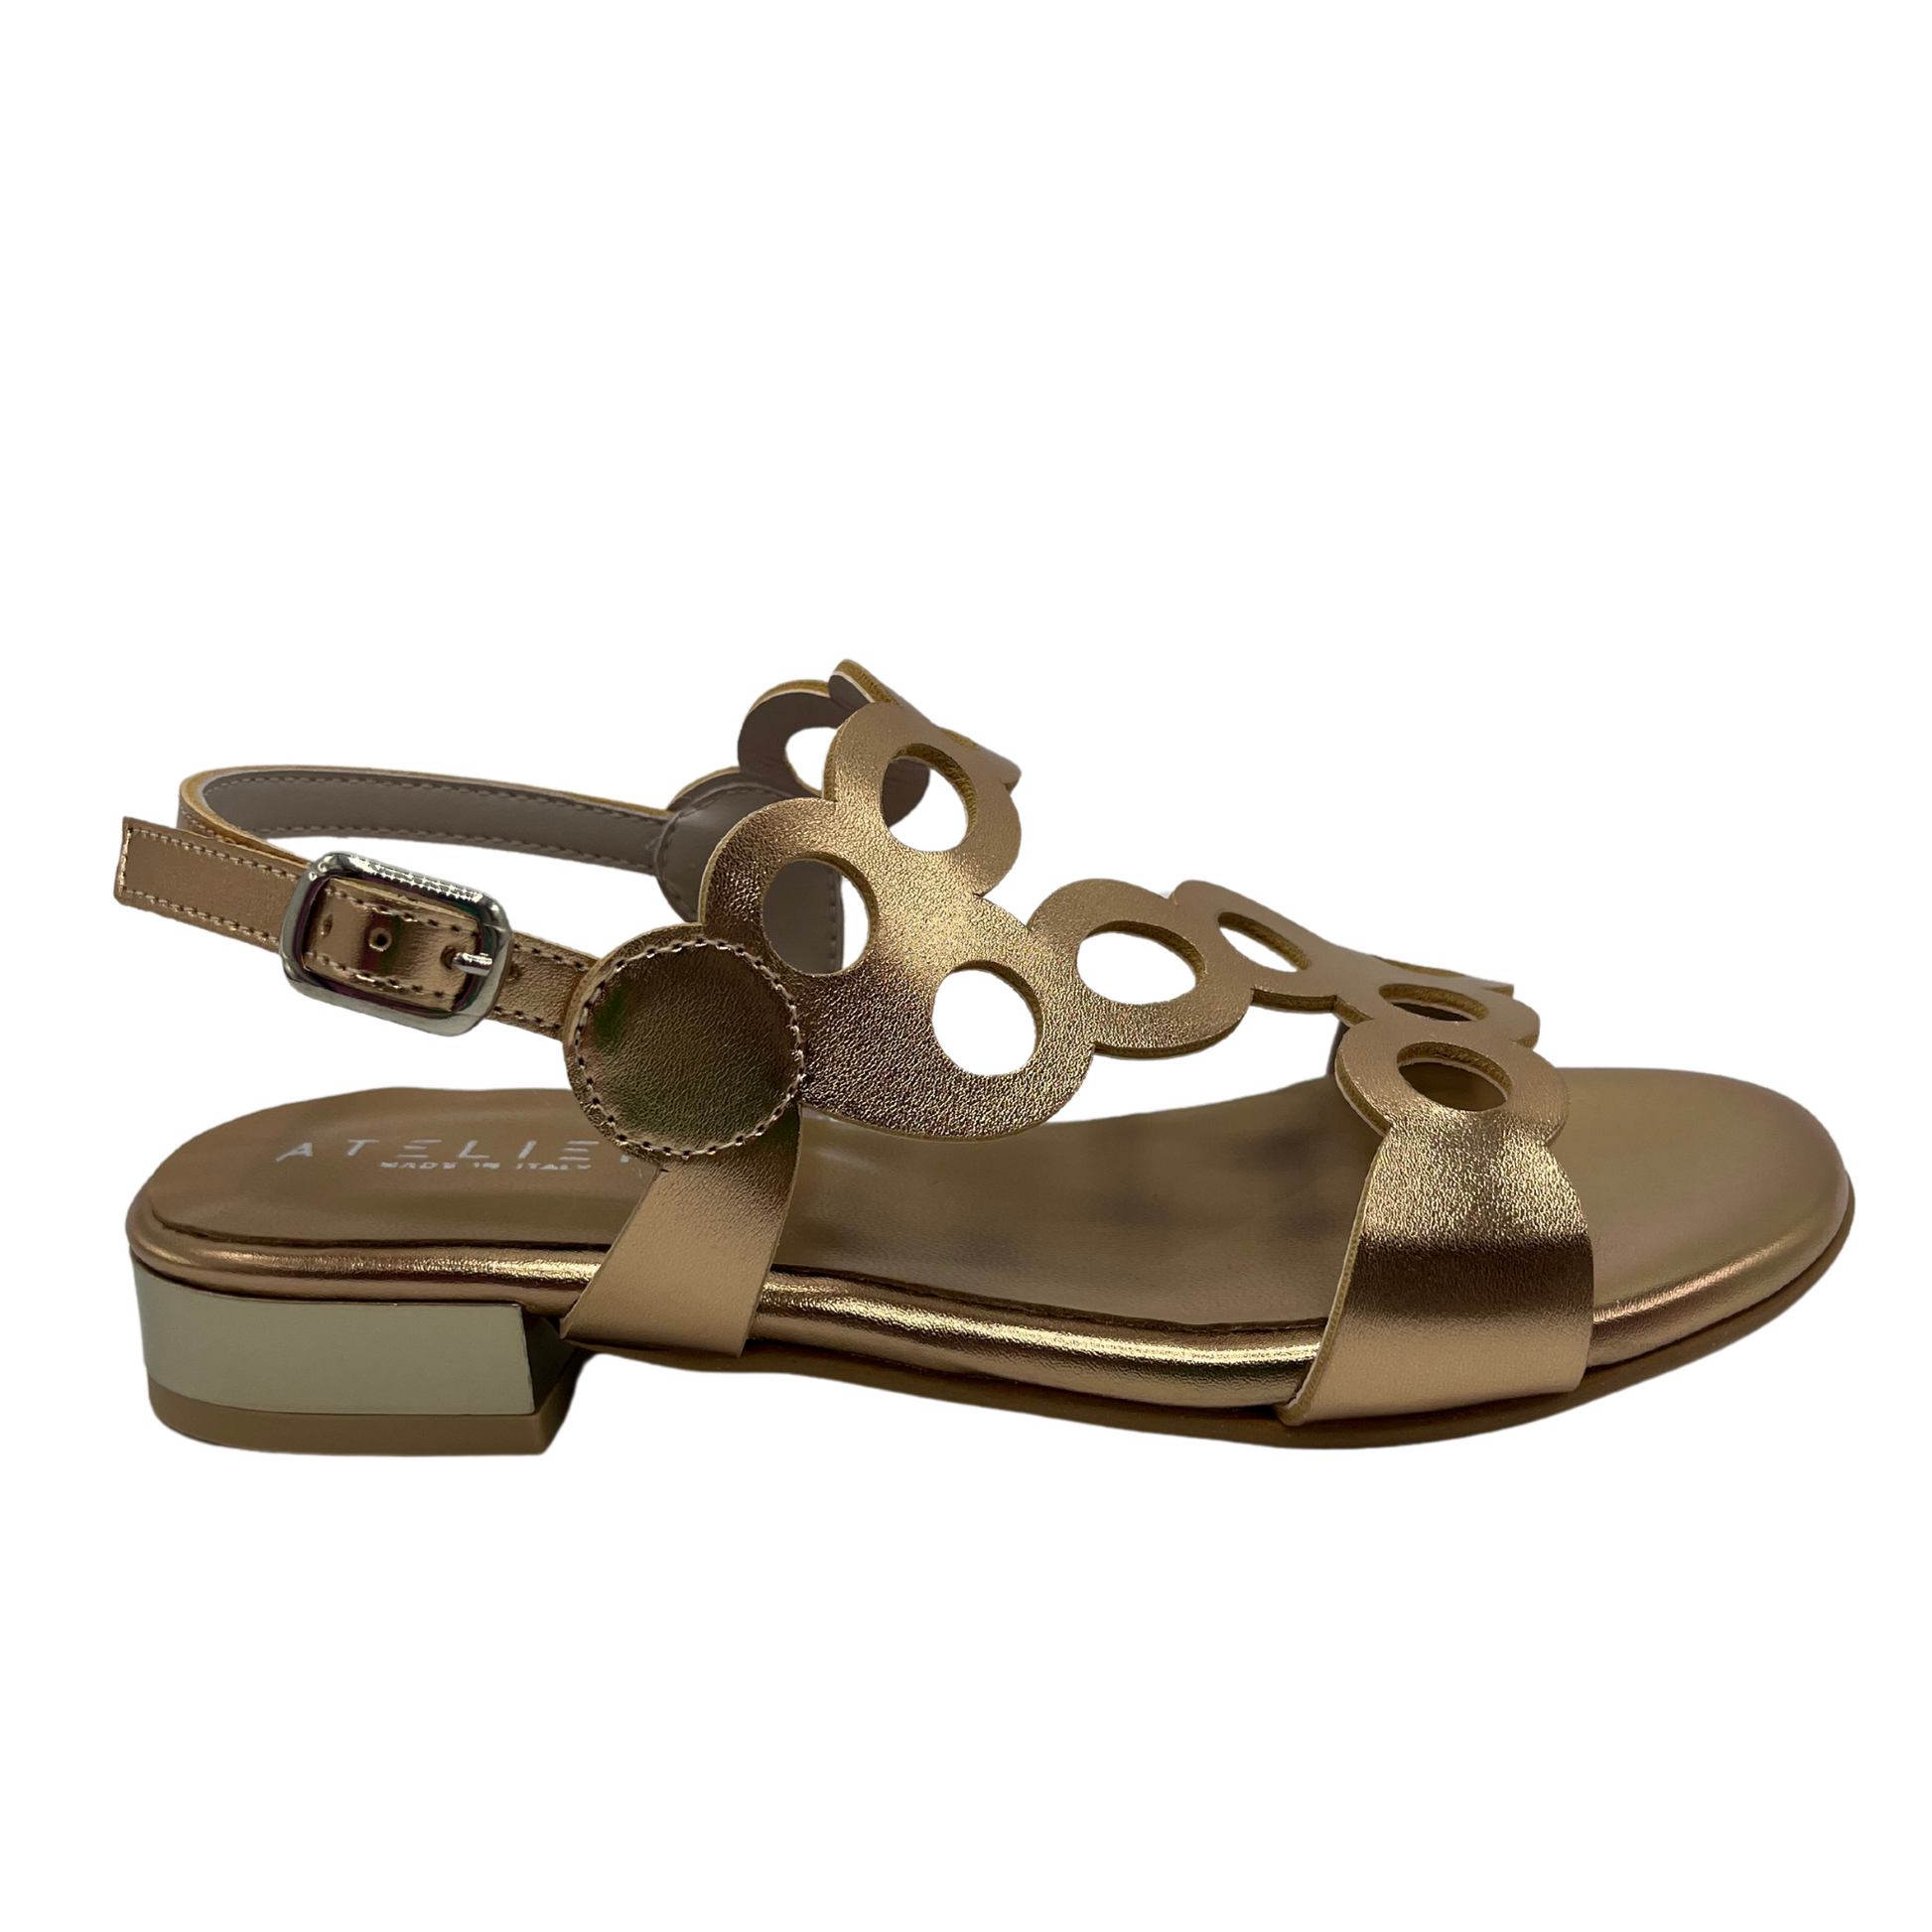 Right facing view of cut out leather sandal in metallic gold with a delicate ankle buckle strap and short block heel